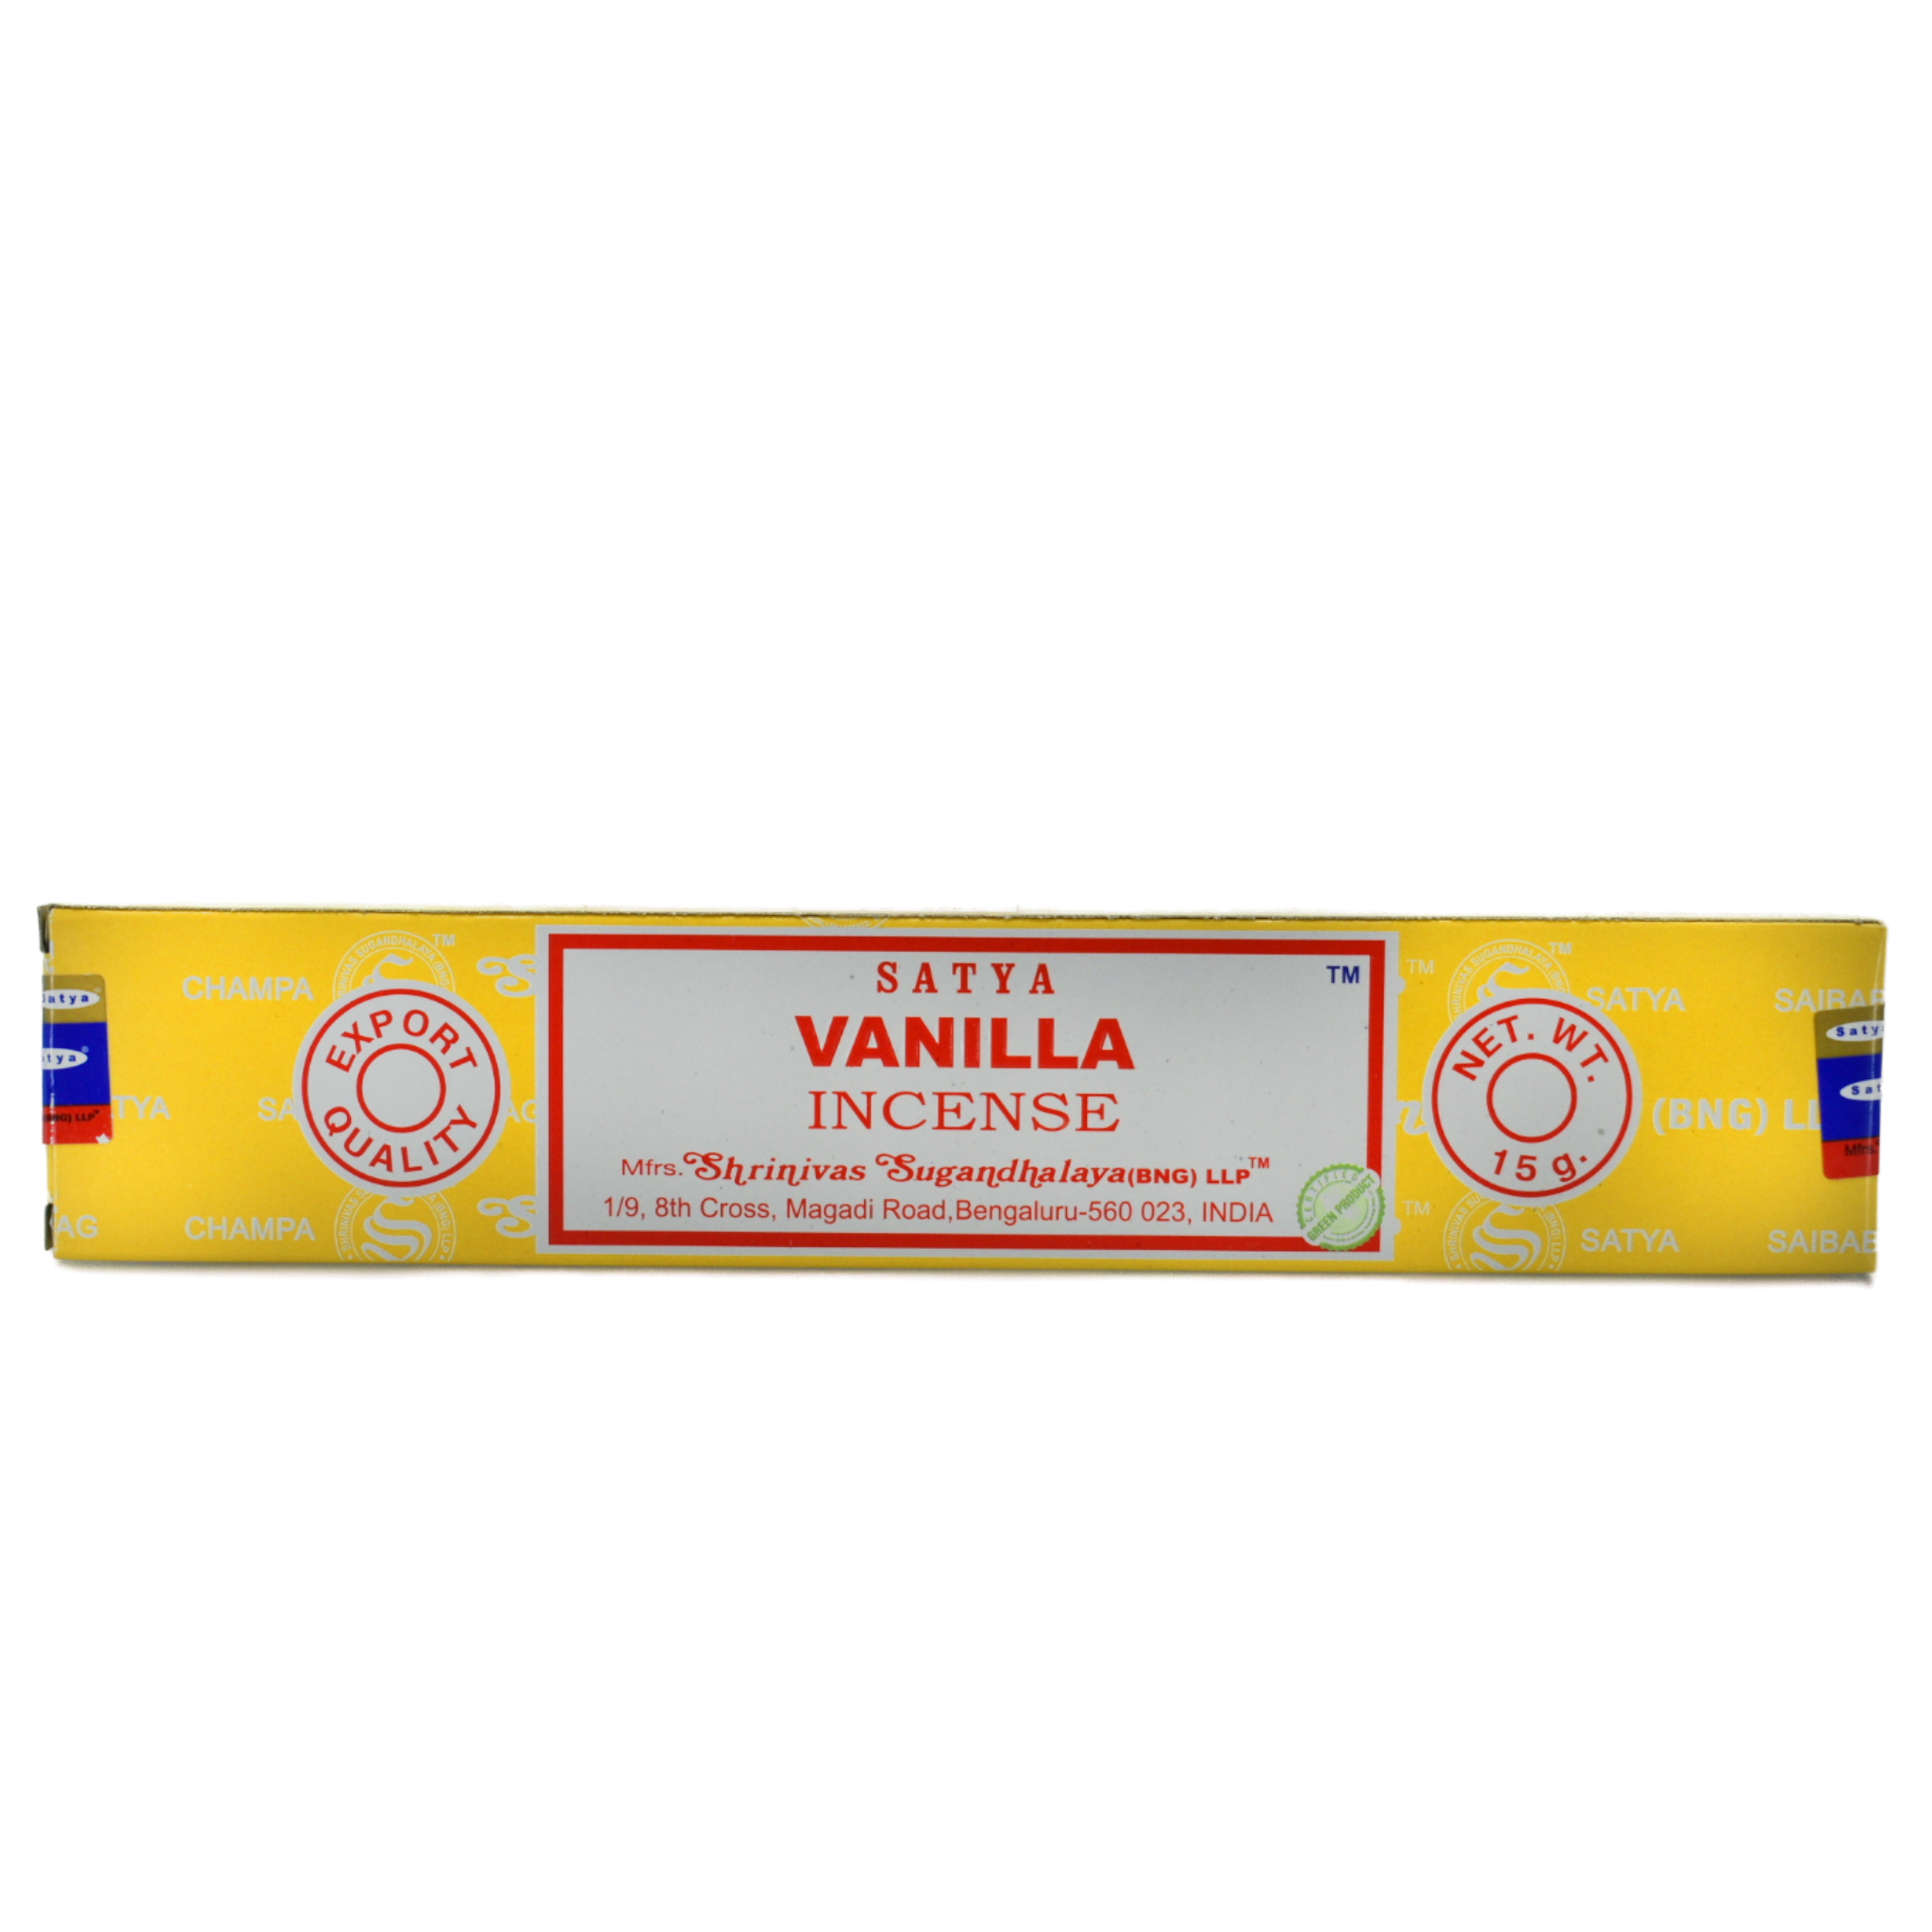 Vanilla Incense Sticks Back.  The back of the cover is a duplicate of the front.